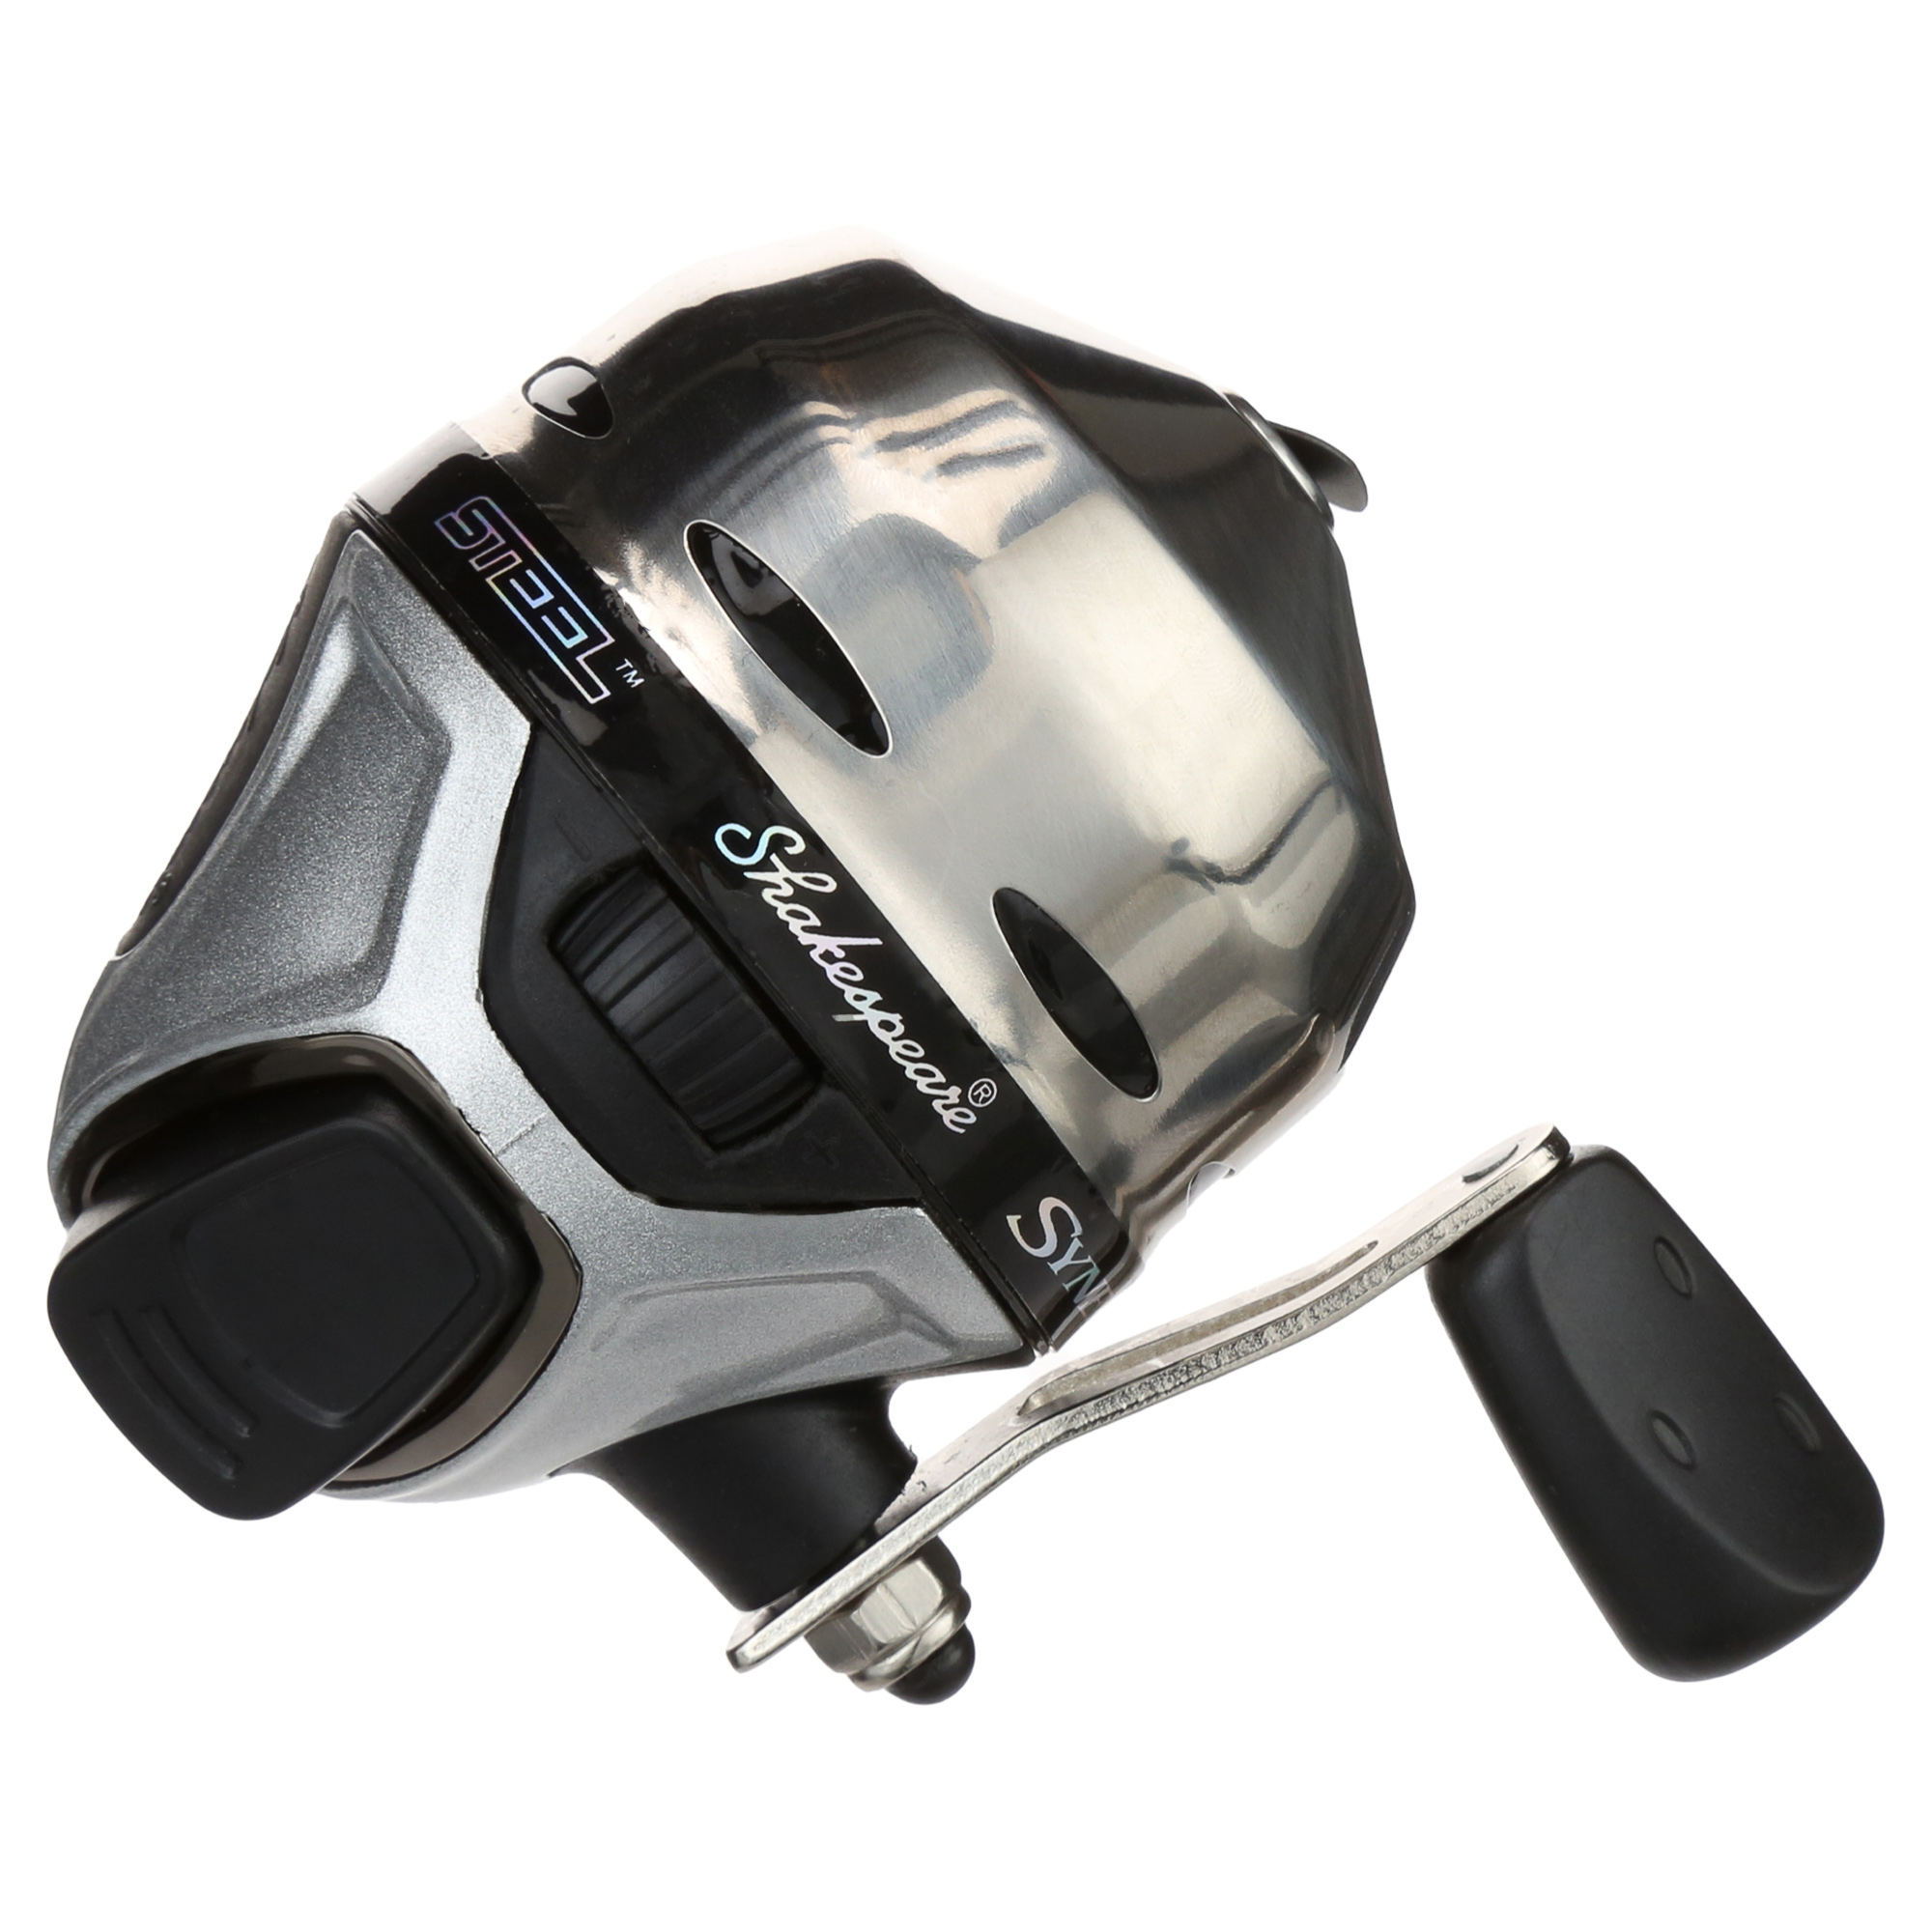 Shakespeare Synergy Steel Fishing Reel for Everyday Anglers - image 4 of 6